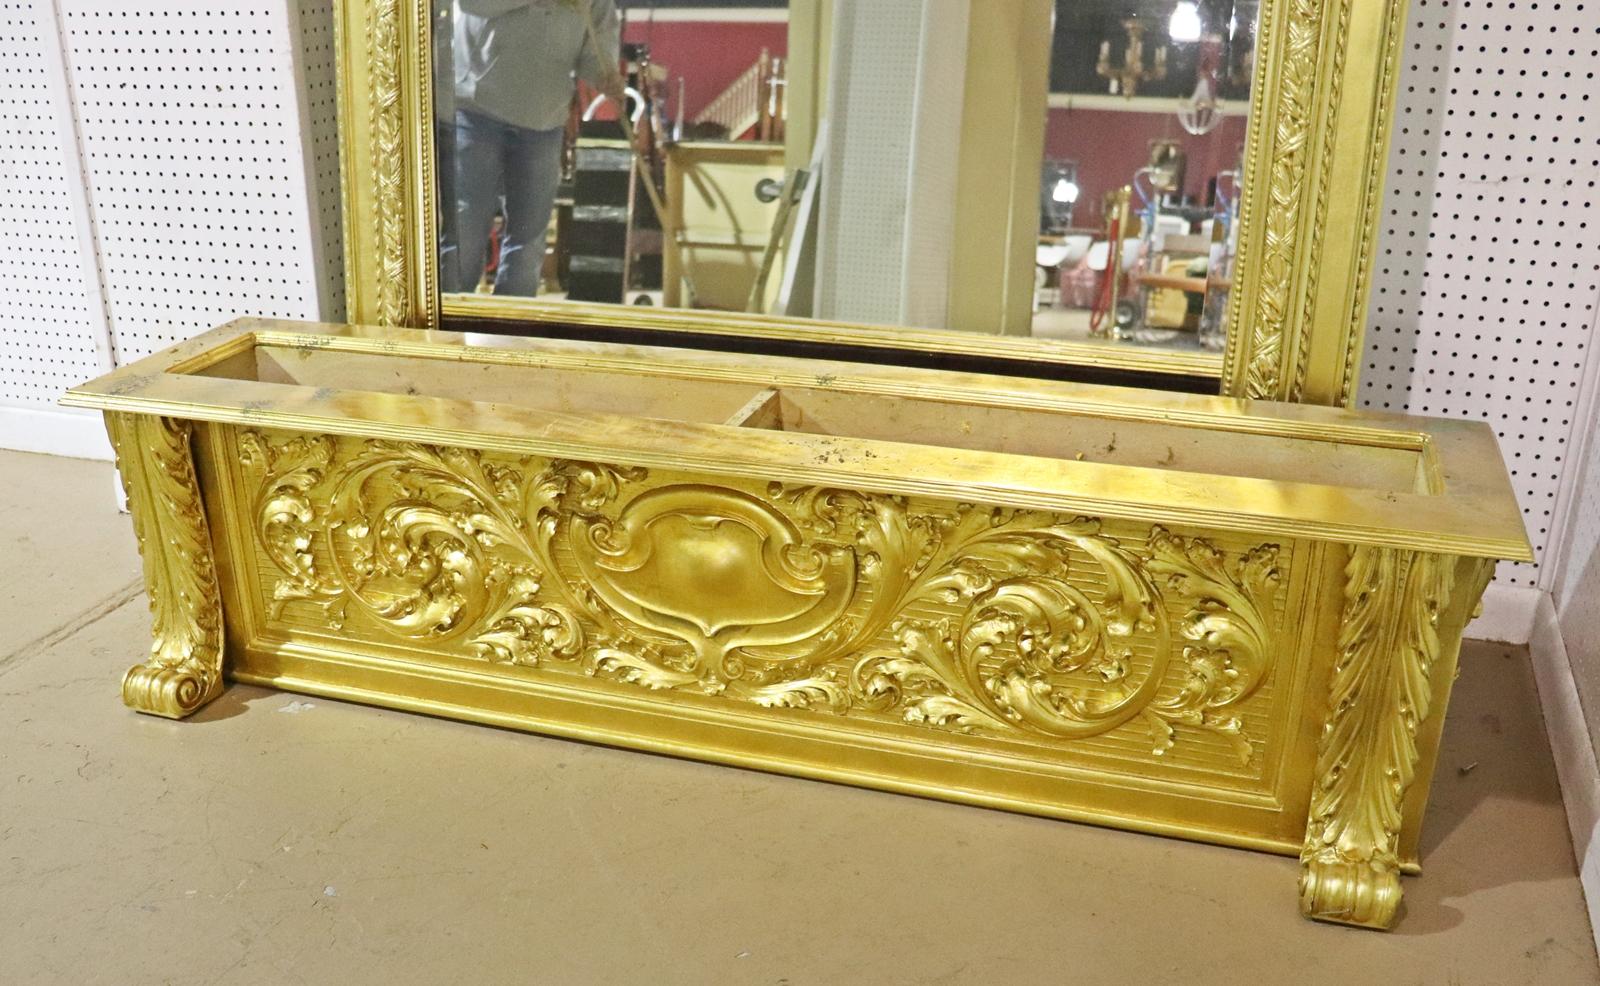 Walnut Monumental Gilded French Louis XV Trumeau Mirror with Planter Base Circa 1890 For Sale